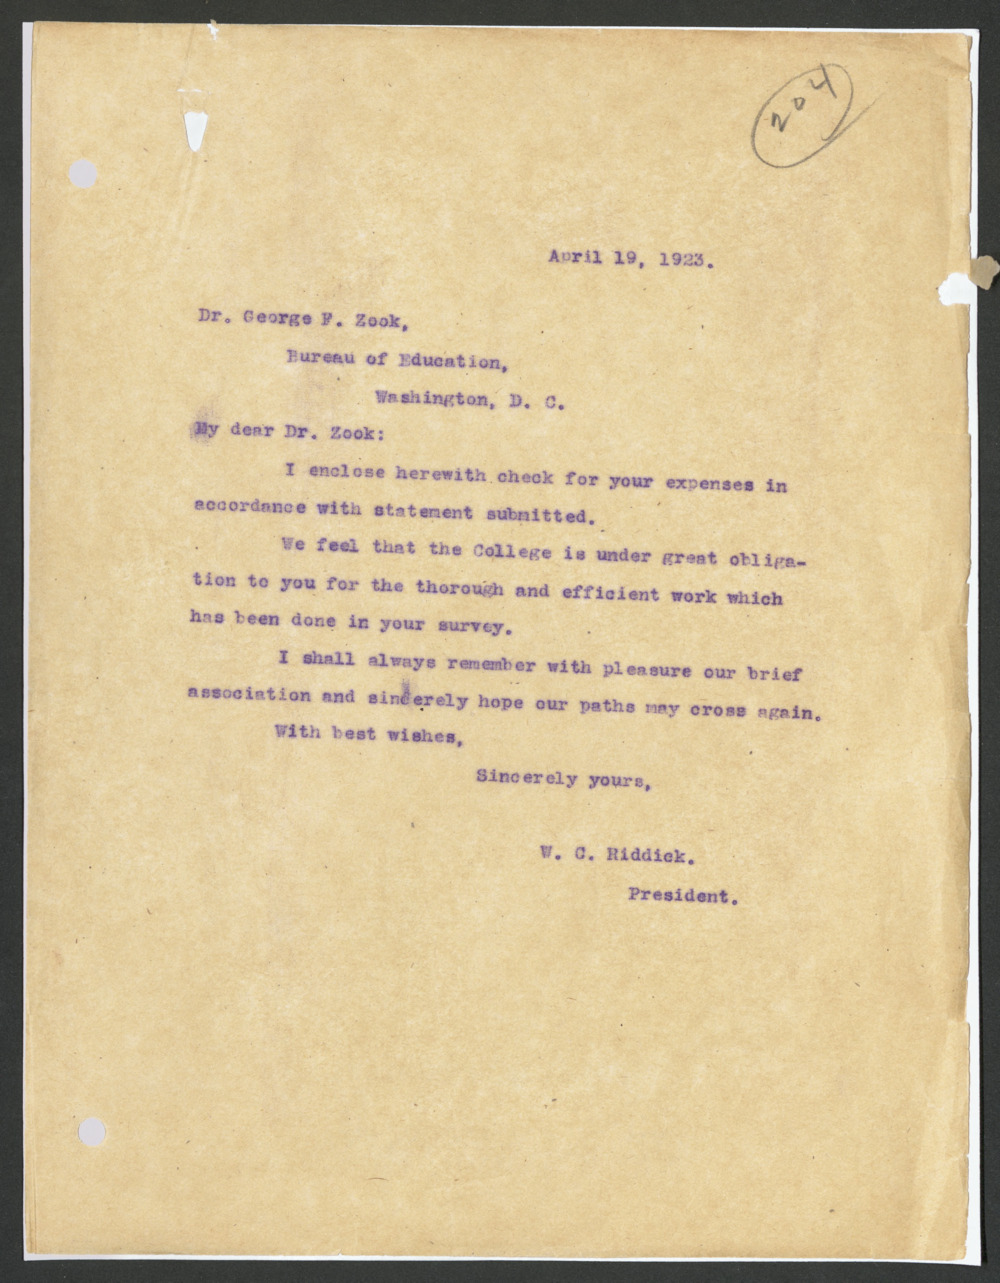 A scan of a typed letter from President W.C. Riddick to Dr. George F. Zook, dated April 19th, 1923.